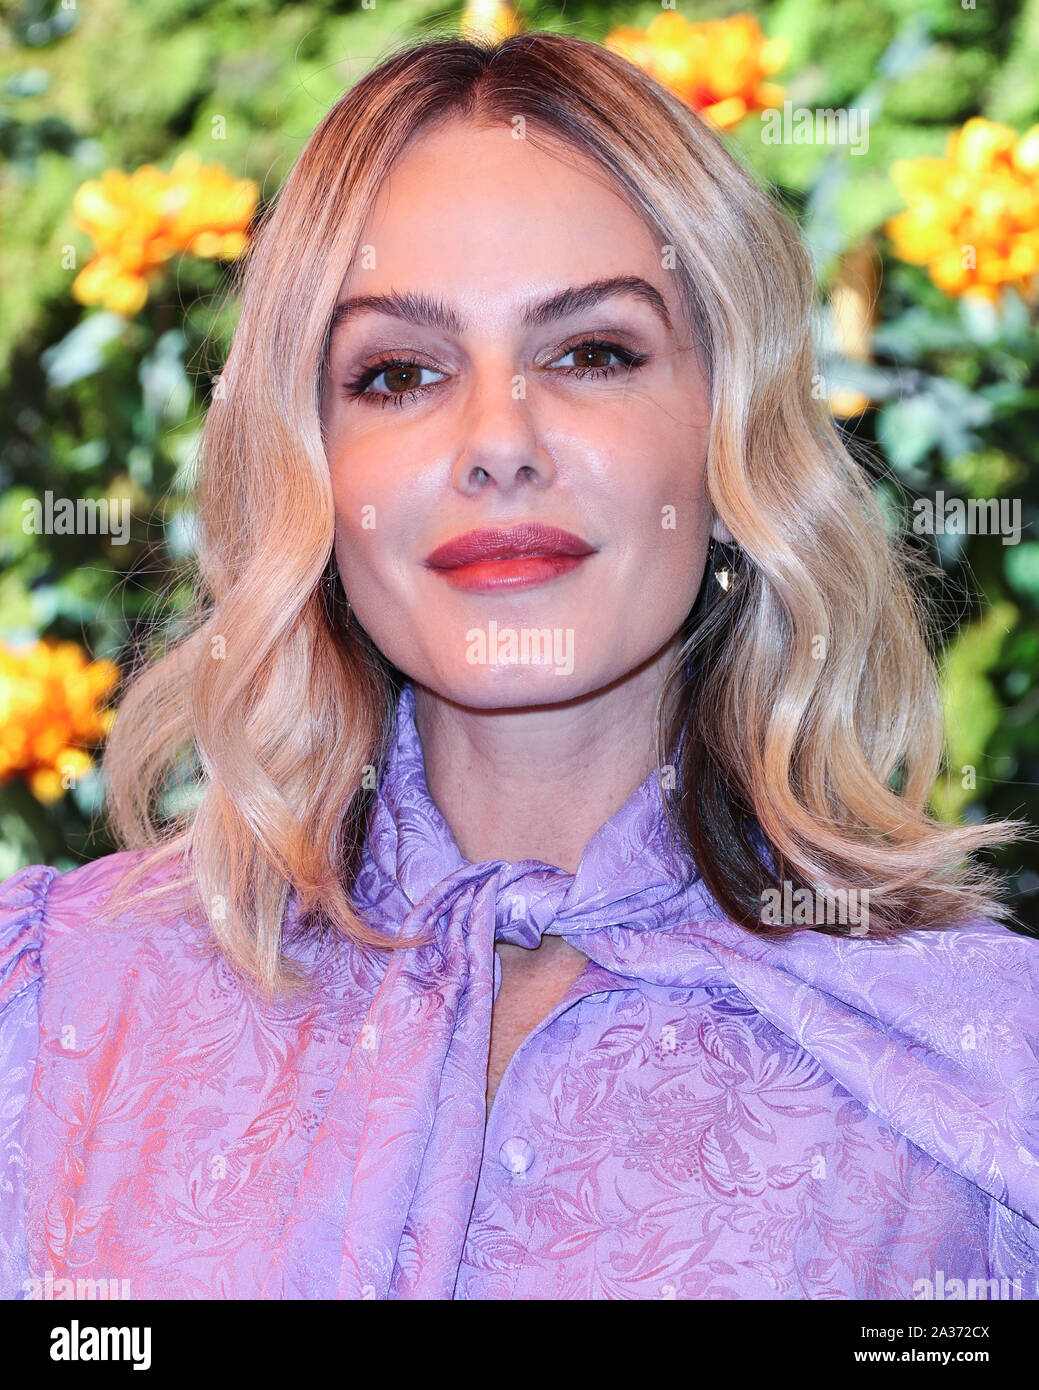 PACIFIC PALISADES, LOS ANGELES, CALIFORNIA, USA - OCTOBER 05: Monet Mazur arrives at the 10th Annual Veuve Clicquot Polo Classic Los Angeles held at Will Rogers State Historic Park on October 5, 2019 in Pacific Palisades, Los Angeles, California, United States. (Photo by Xavier Collin/Image Press Agency) Stock Photo